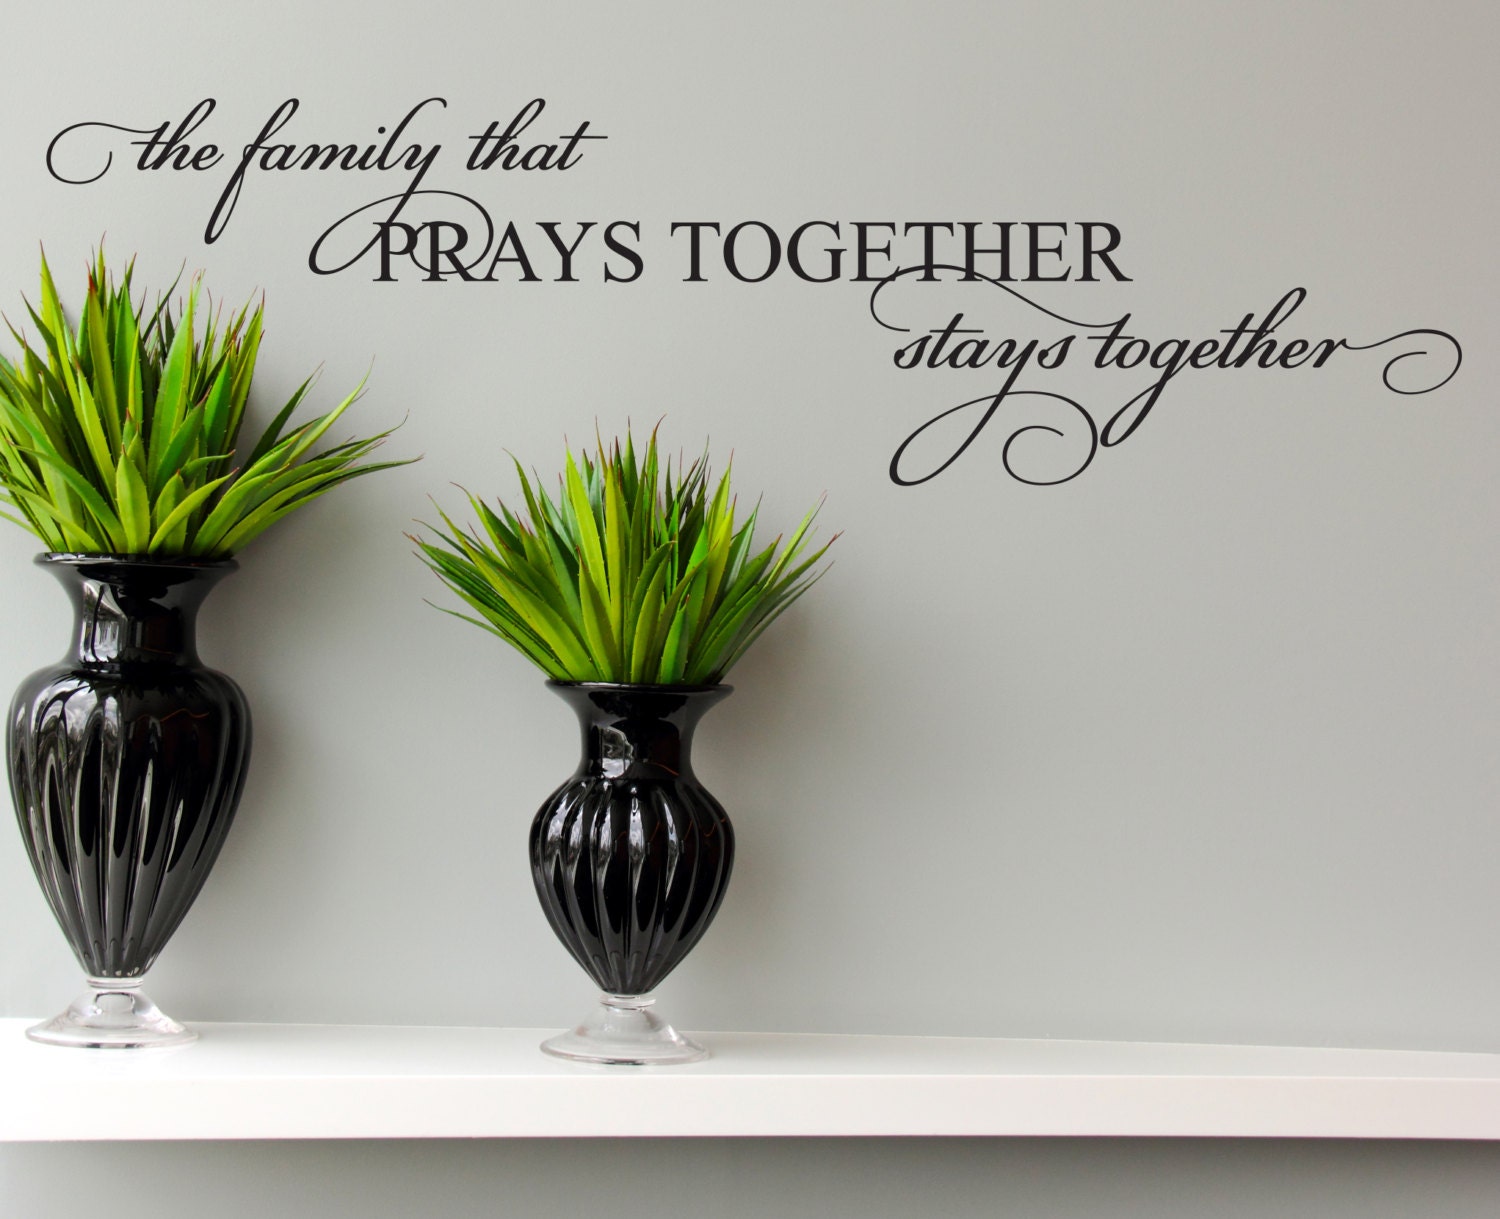 The Family That Stays Together by Deborah Plummer Bussey